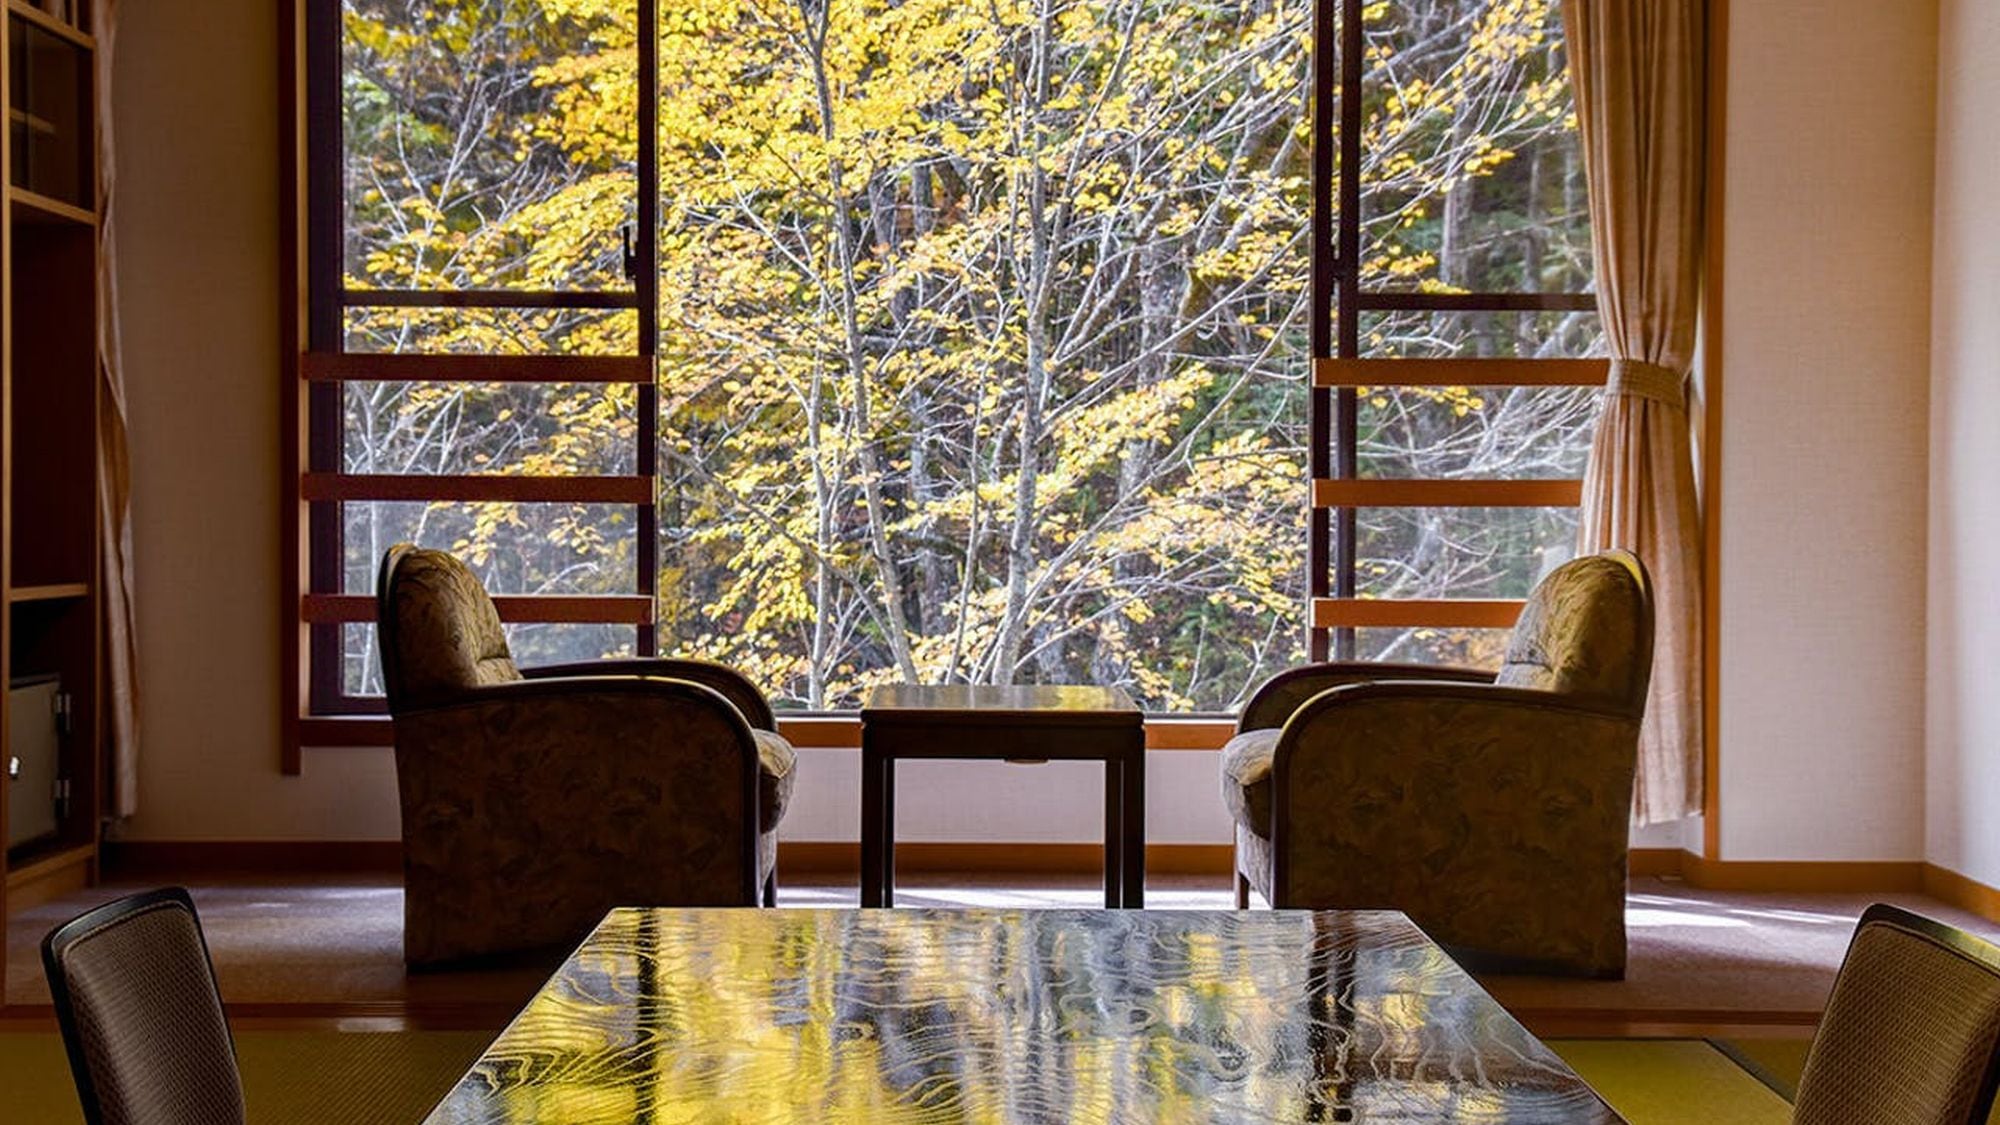 [Example of Japanese-style room in the main building] The sound of mountain streams and the autumn scenery full of windows to enjoy